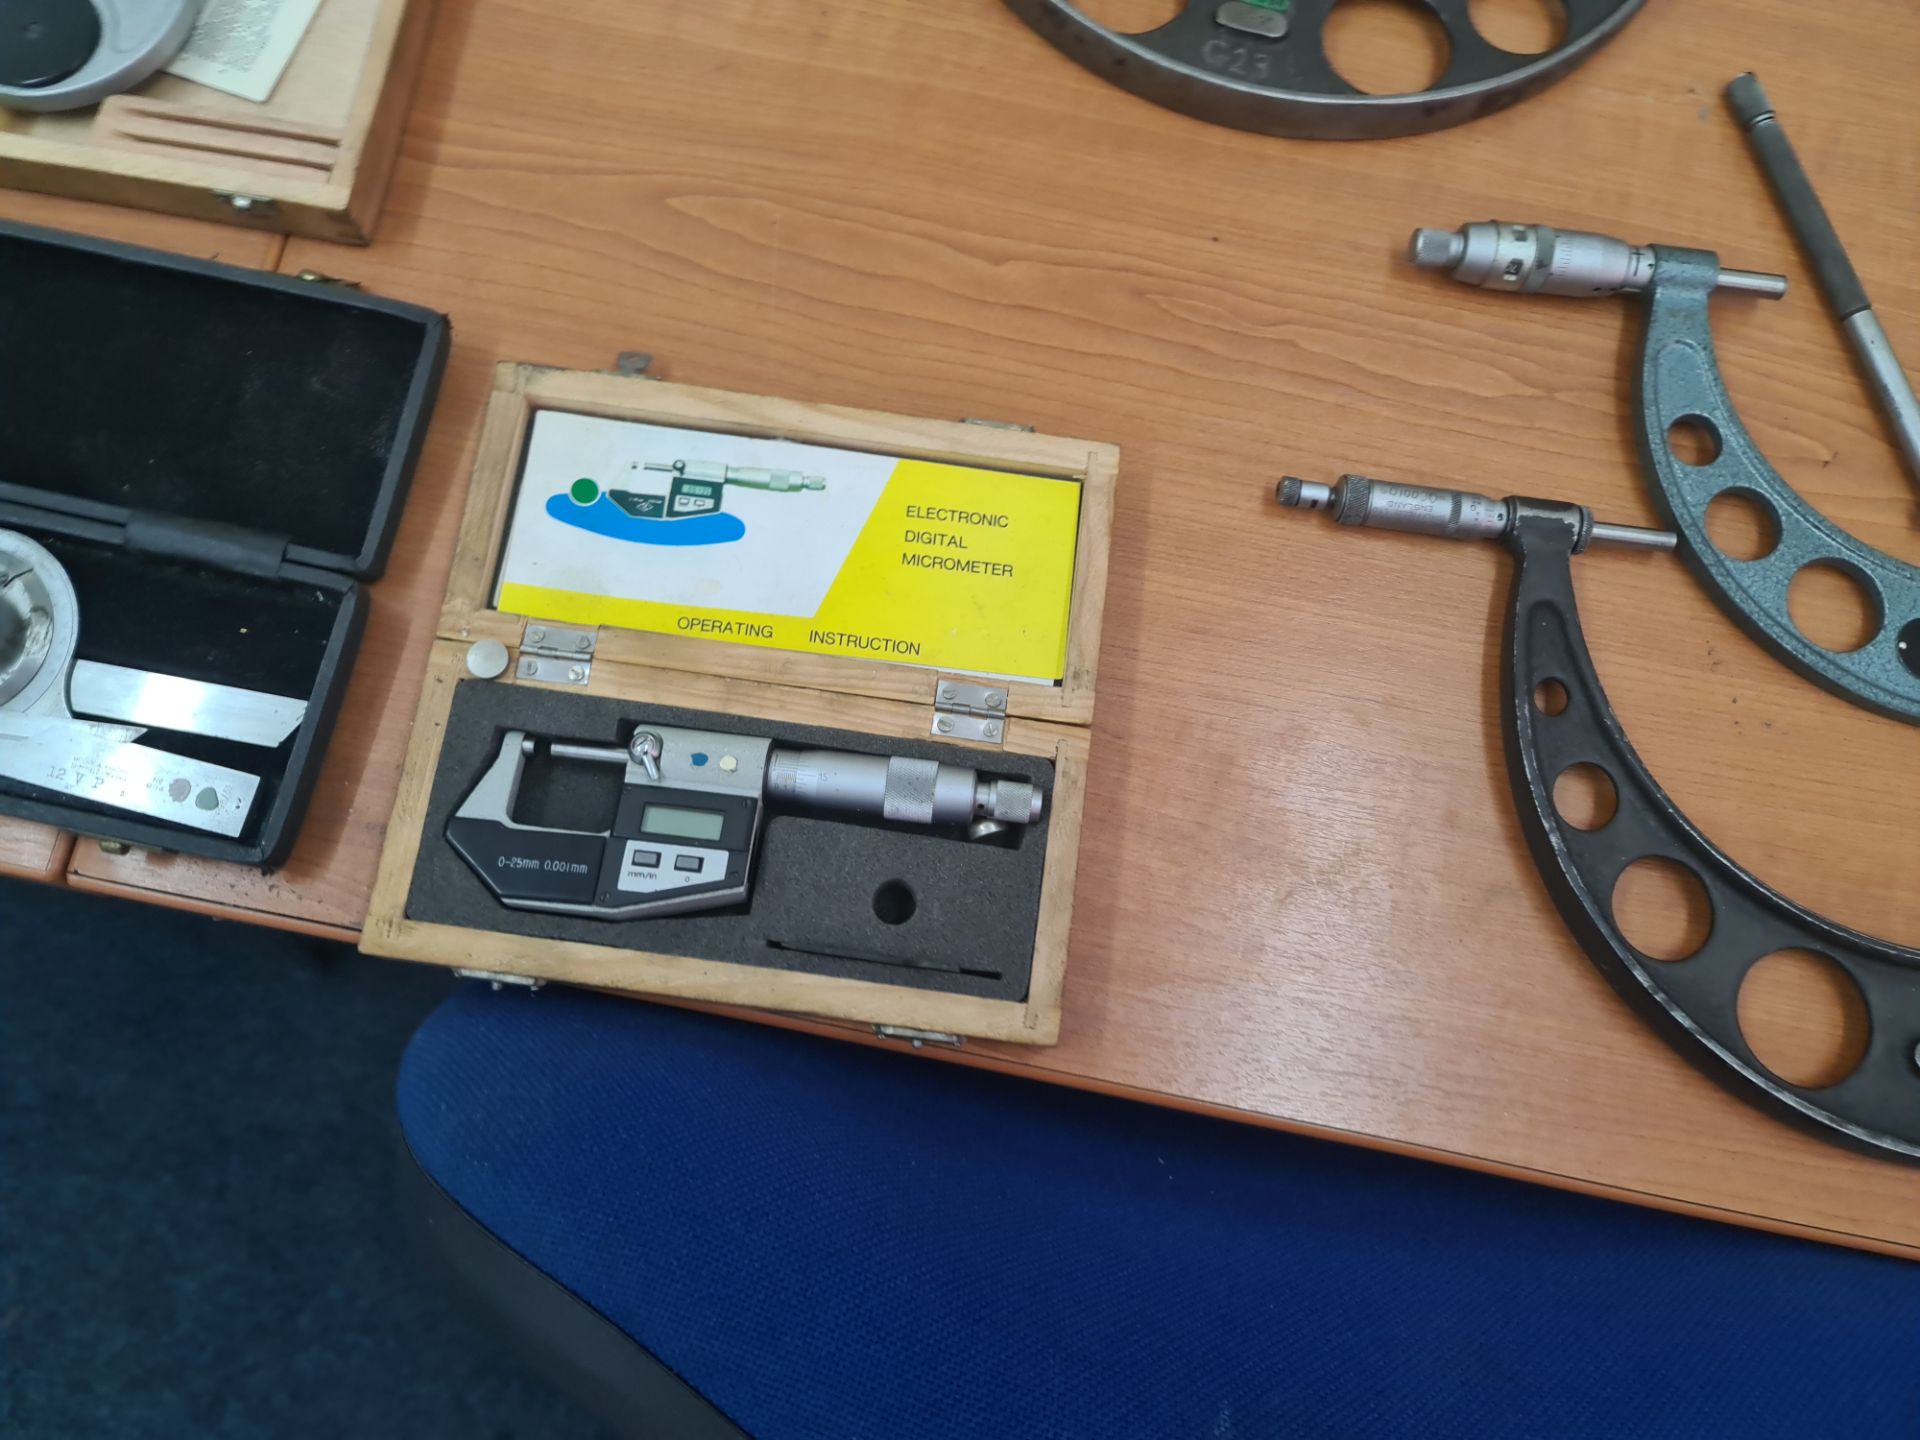 Large quantity of micrometers, callipers & other measuring equipment comprising trolley & contents. - Image 27 of 28